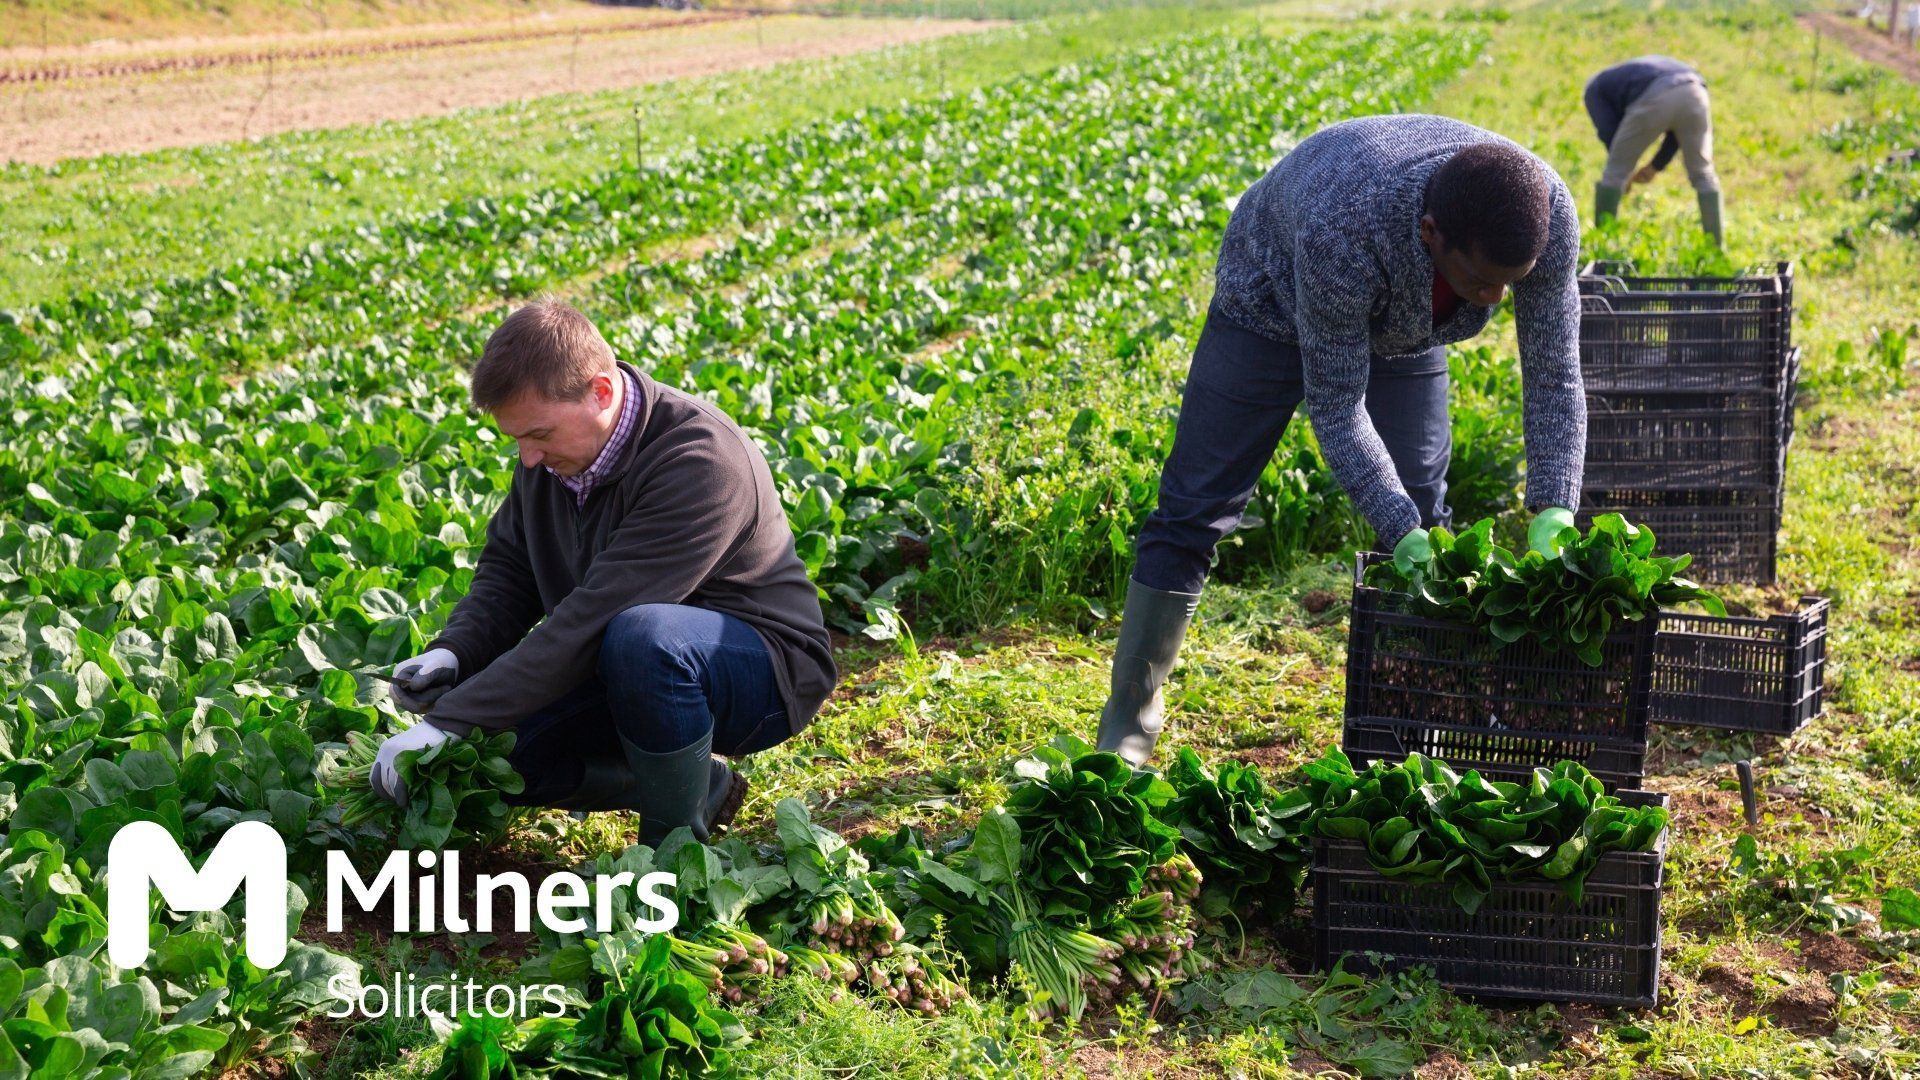 In 2019, the Tories debuted a new seasonal workers scheme to help UK farmers. But what's the state of the scheme now? And what does the future hold?